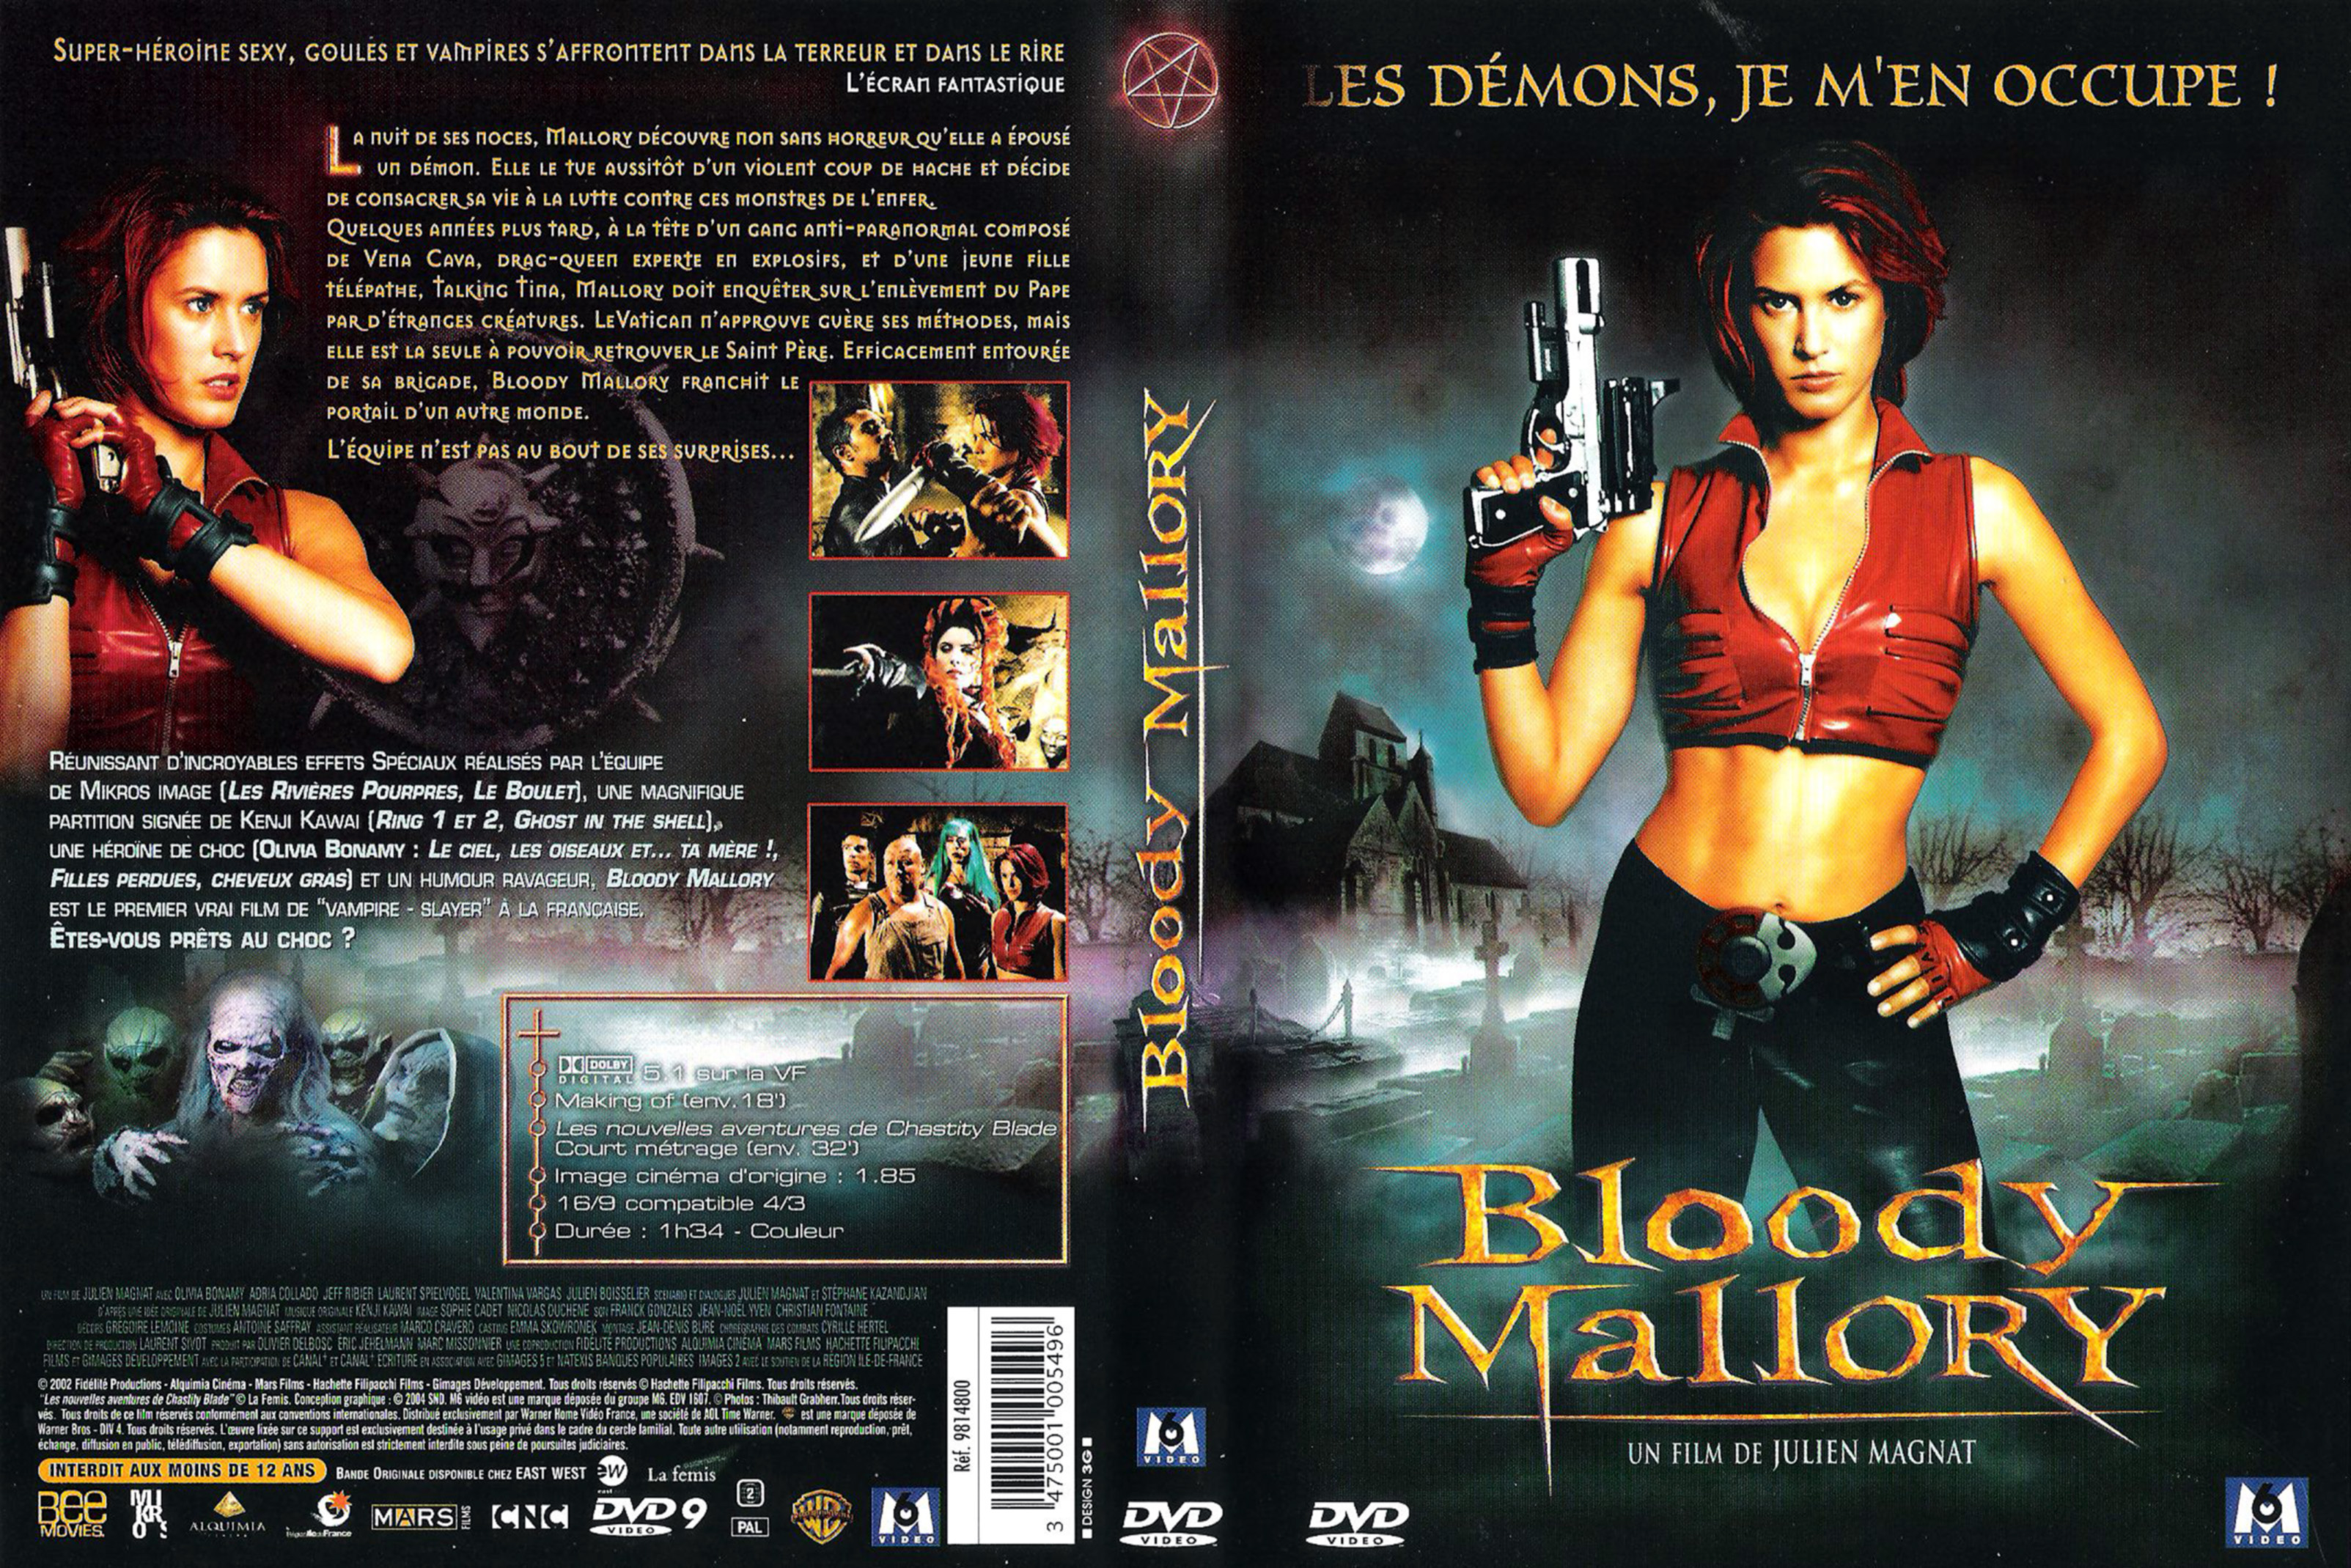 Jaquette DVD Bloody Mallory v2